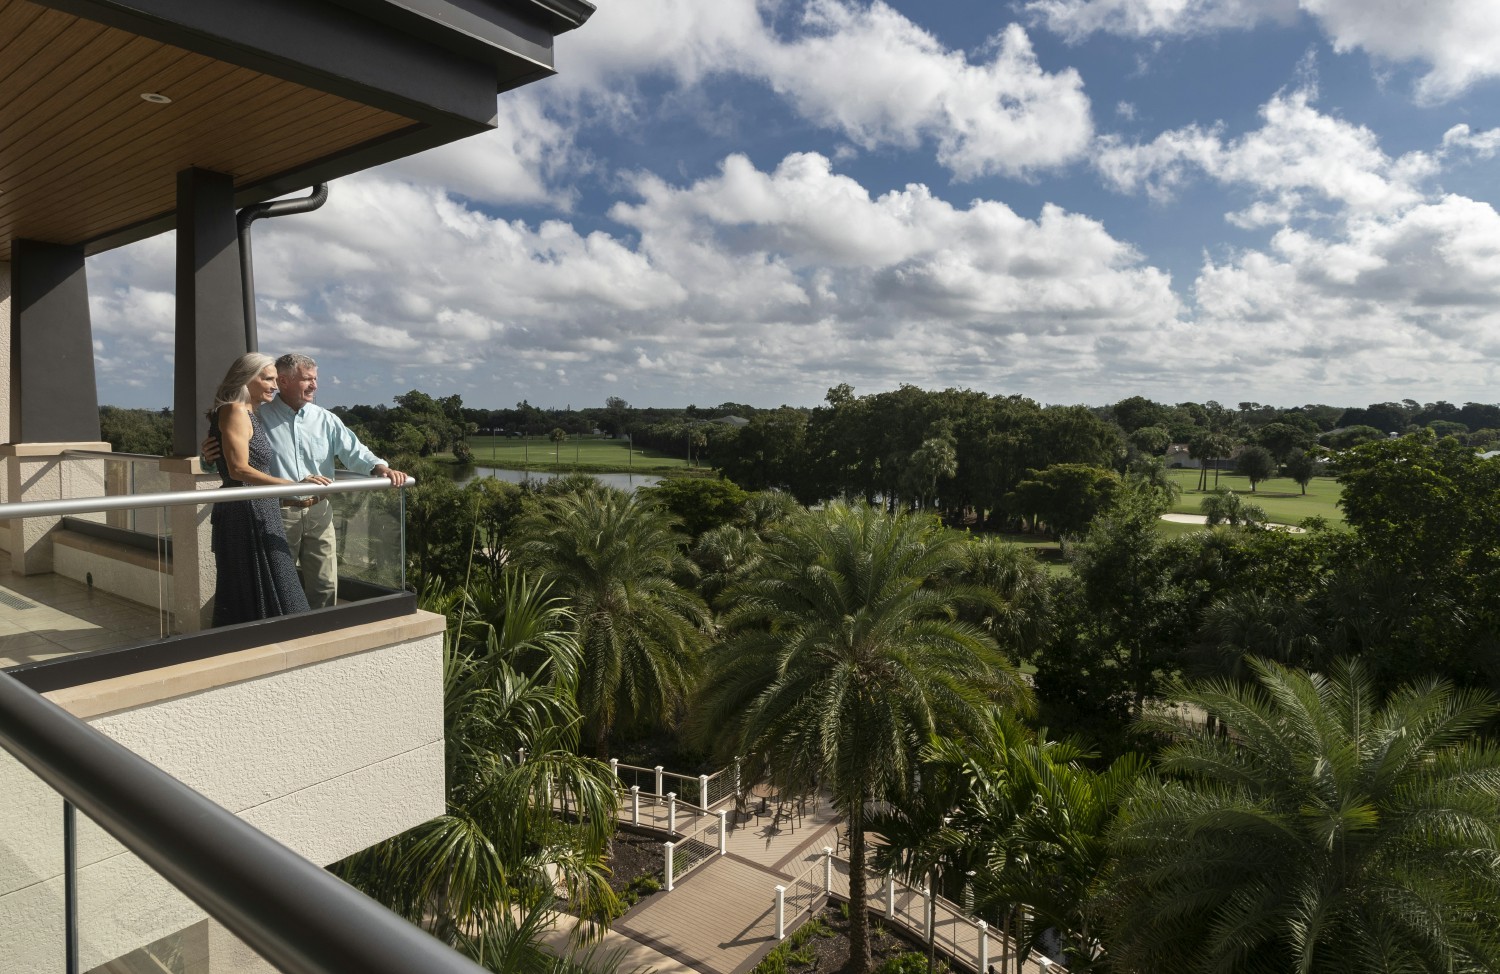 Soaring views from one of Mooring Park’s luxury residences.